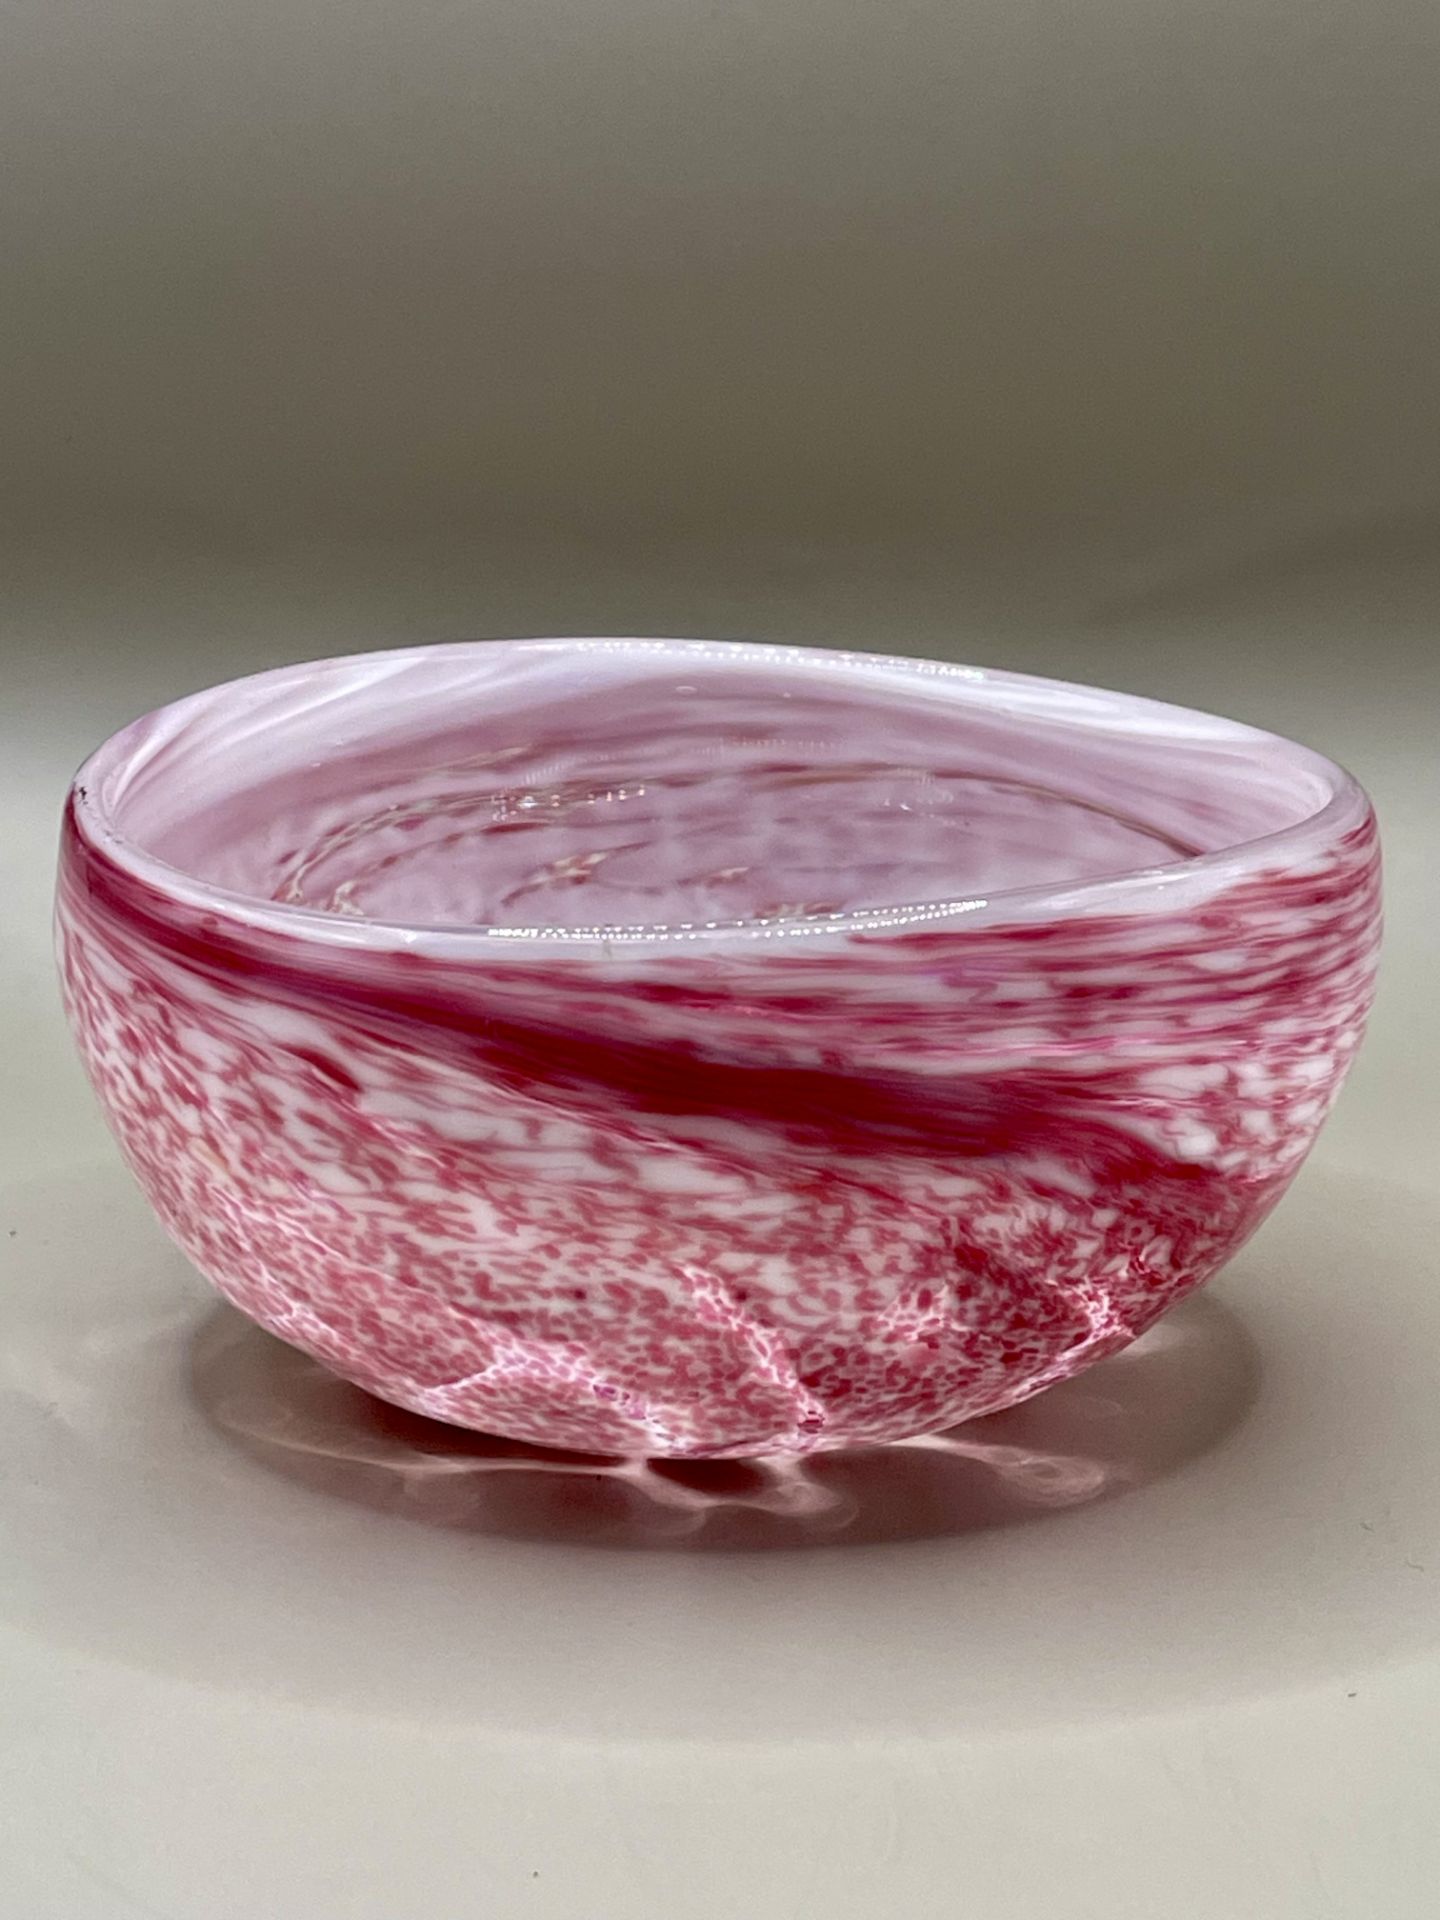 A lovely Murano small glass dish with swirl and white pattern.&nbsp;